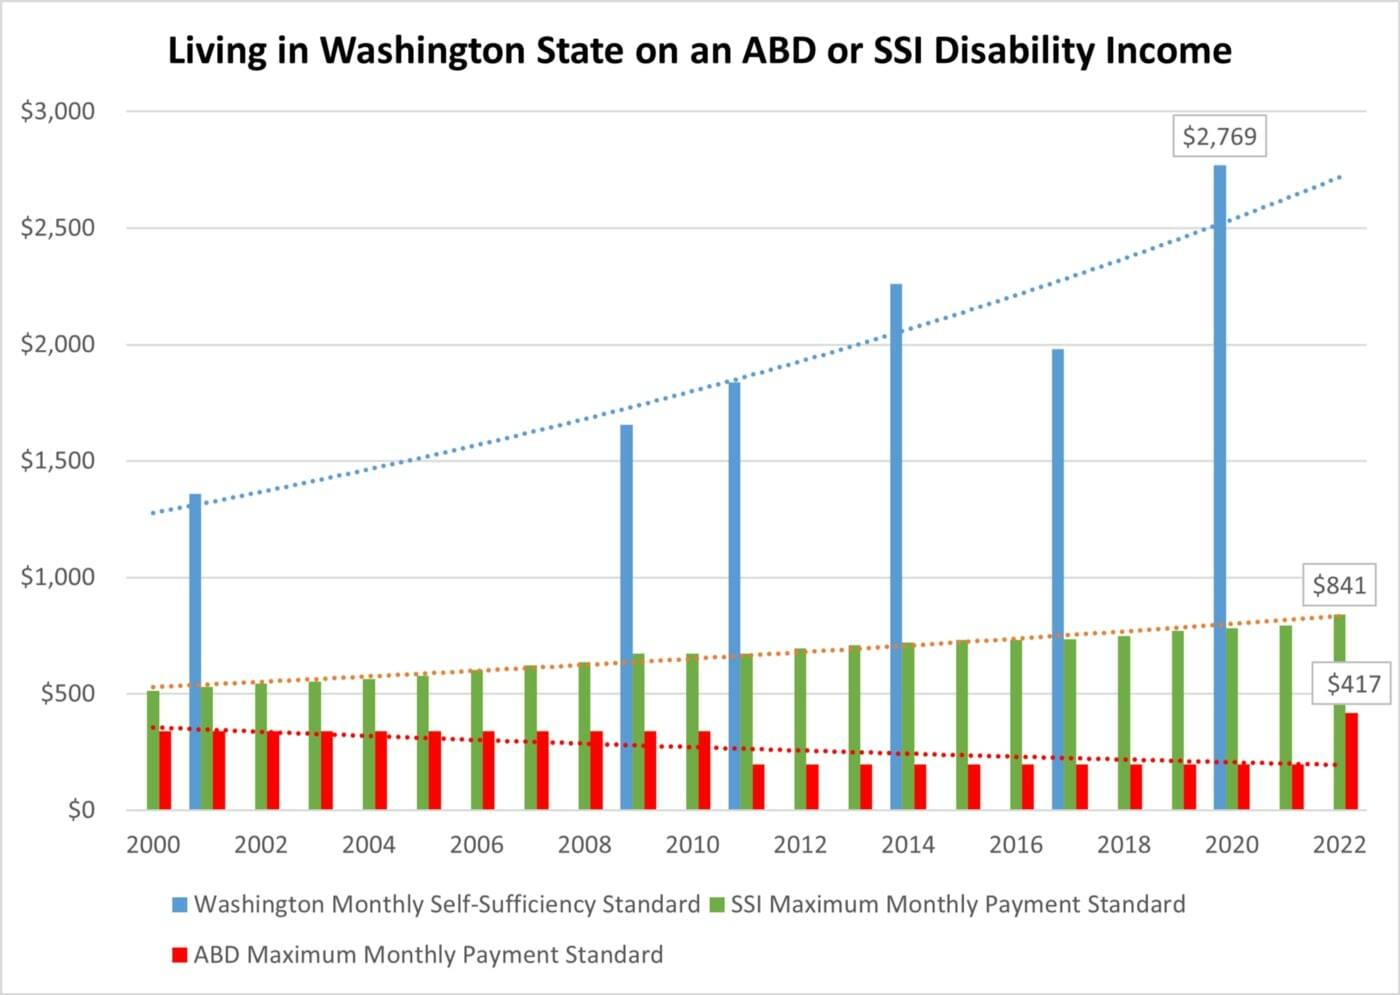 Washington’s monthly self-sufficiency standard compared to ABD maximum monthly payment standards and SSI maximum monthly payment standards. Courtesy of DSHS.